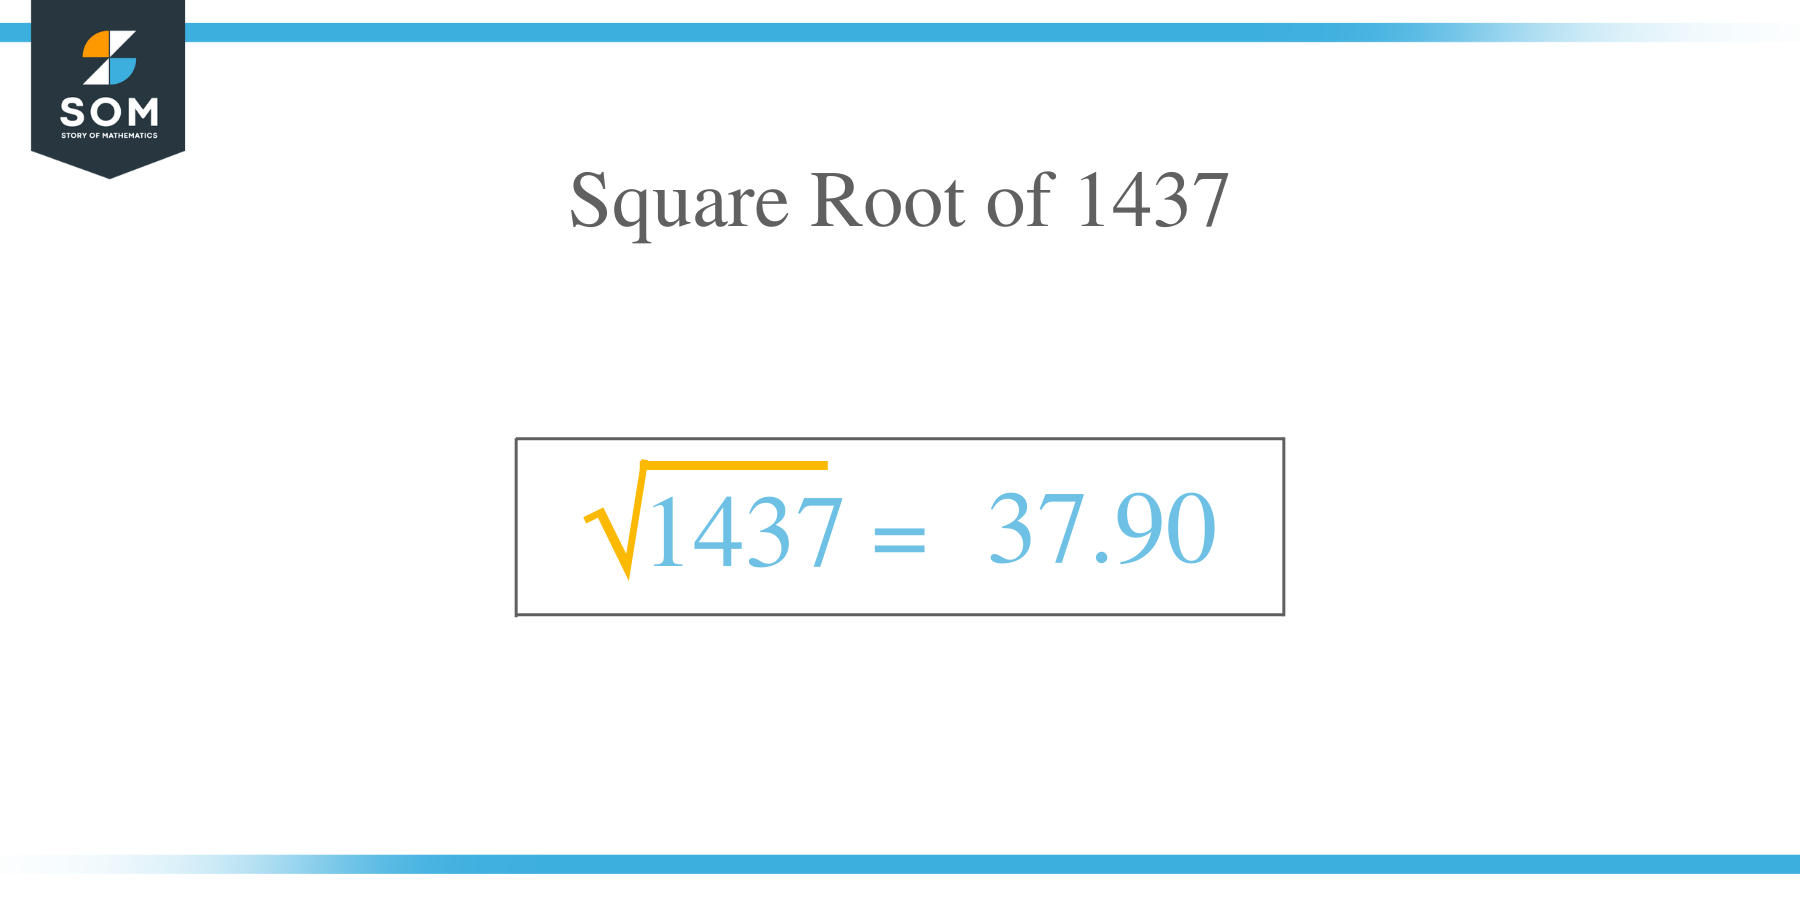 Square Root of 1437